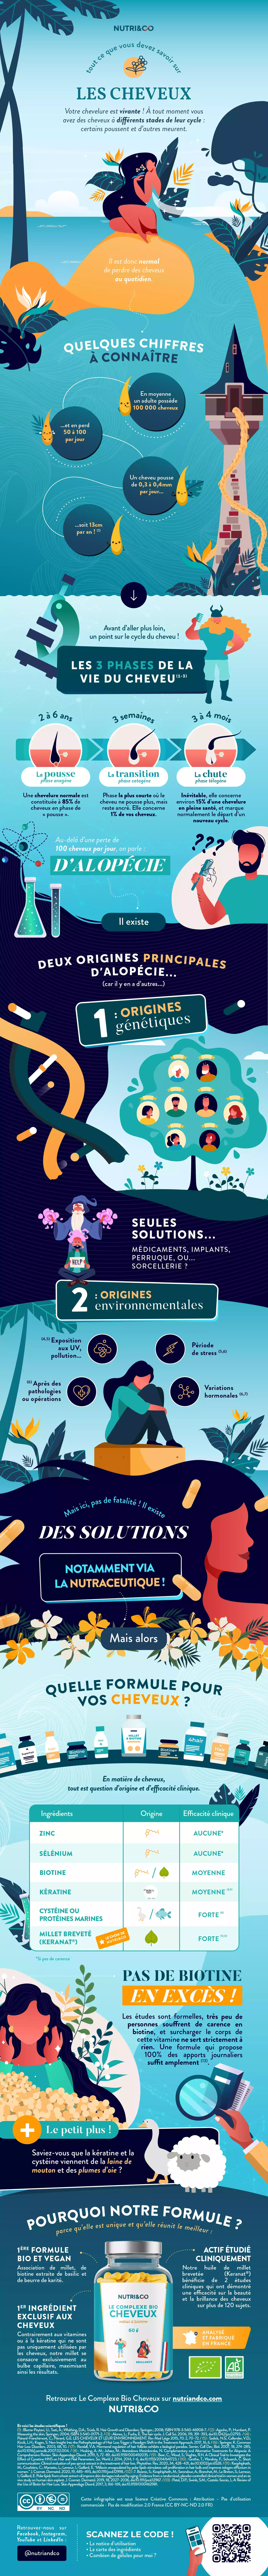 Infographie cheveux